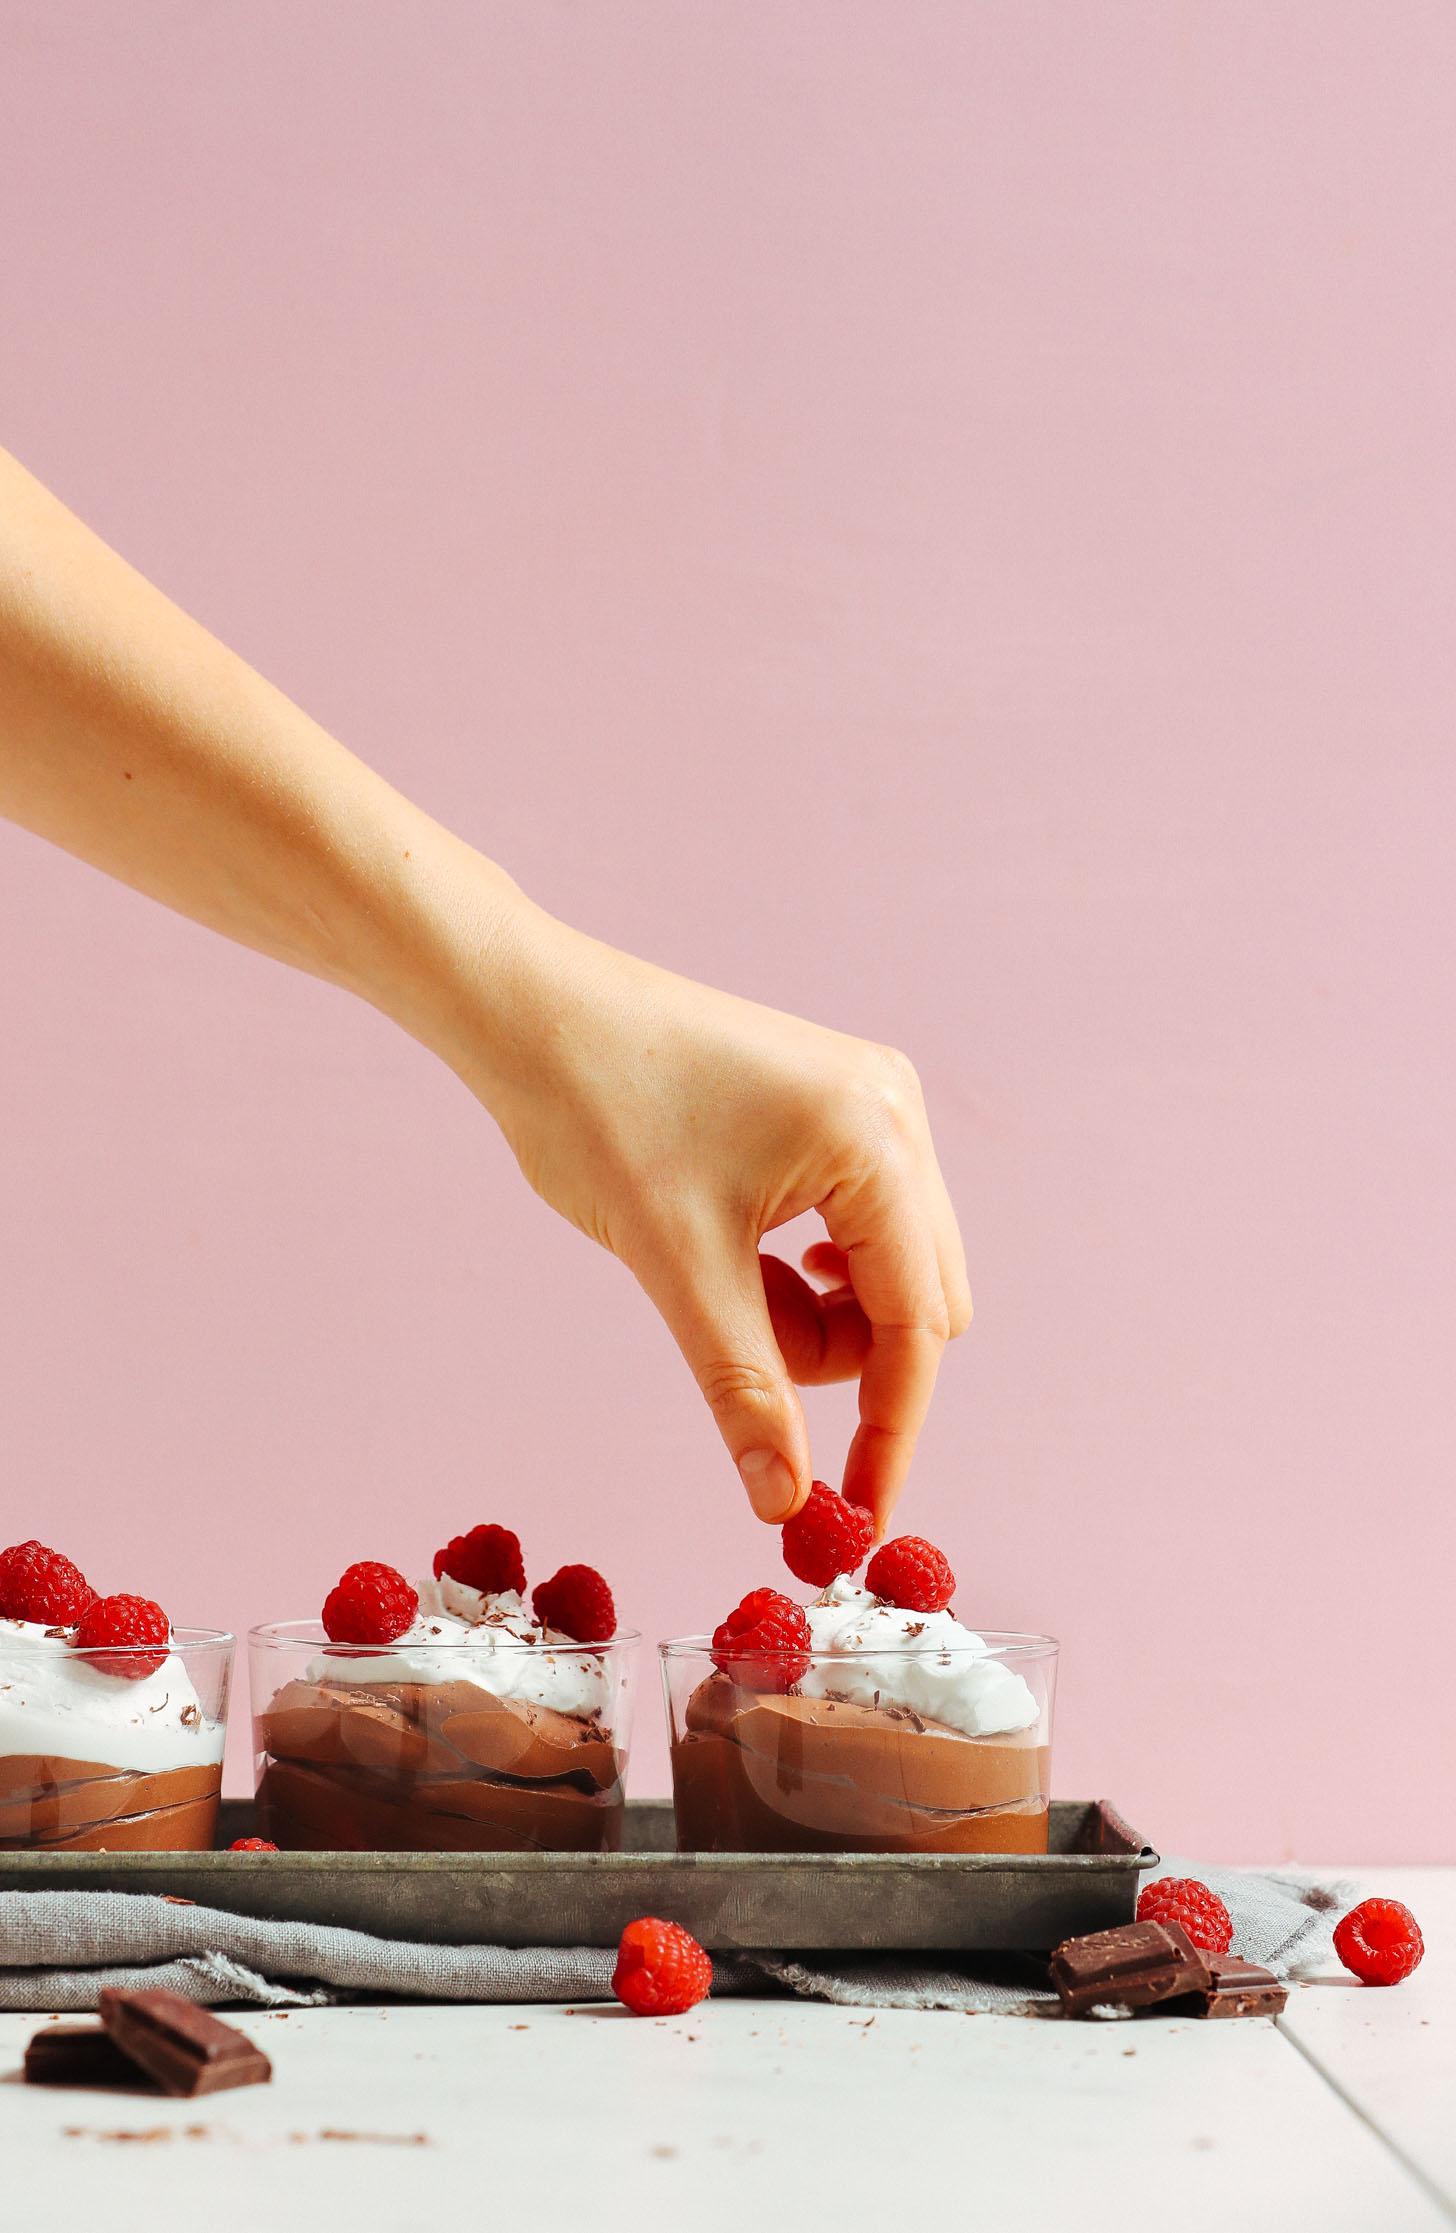 Placing a raspberry on top of a glass of Vegan Chocolate Mousse with coconut whipped cream